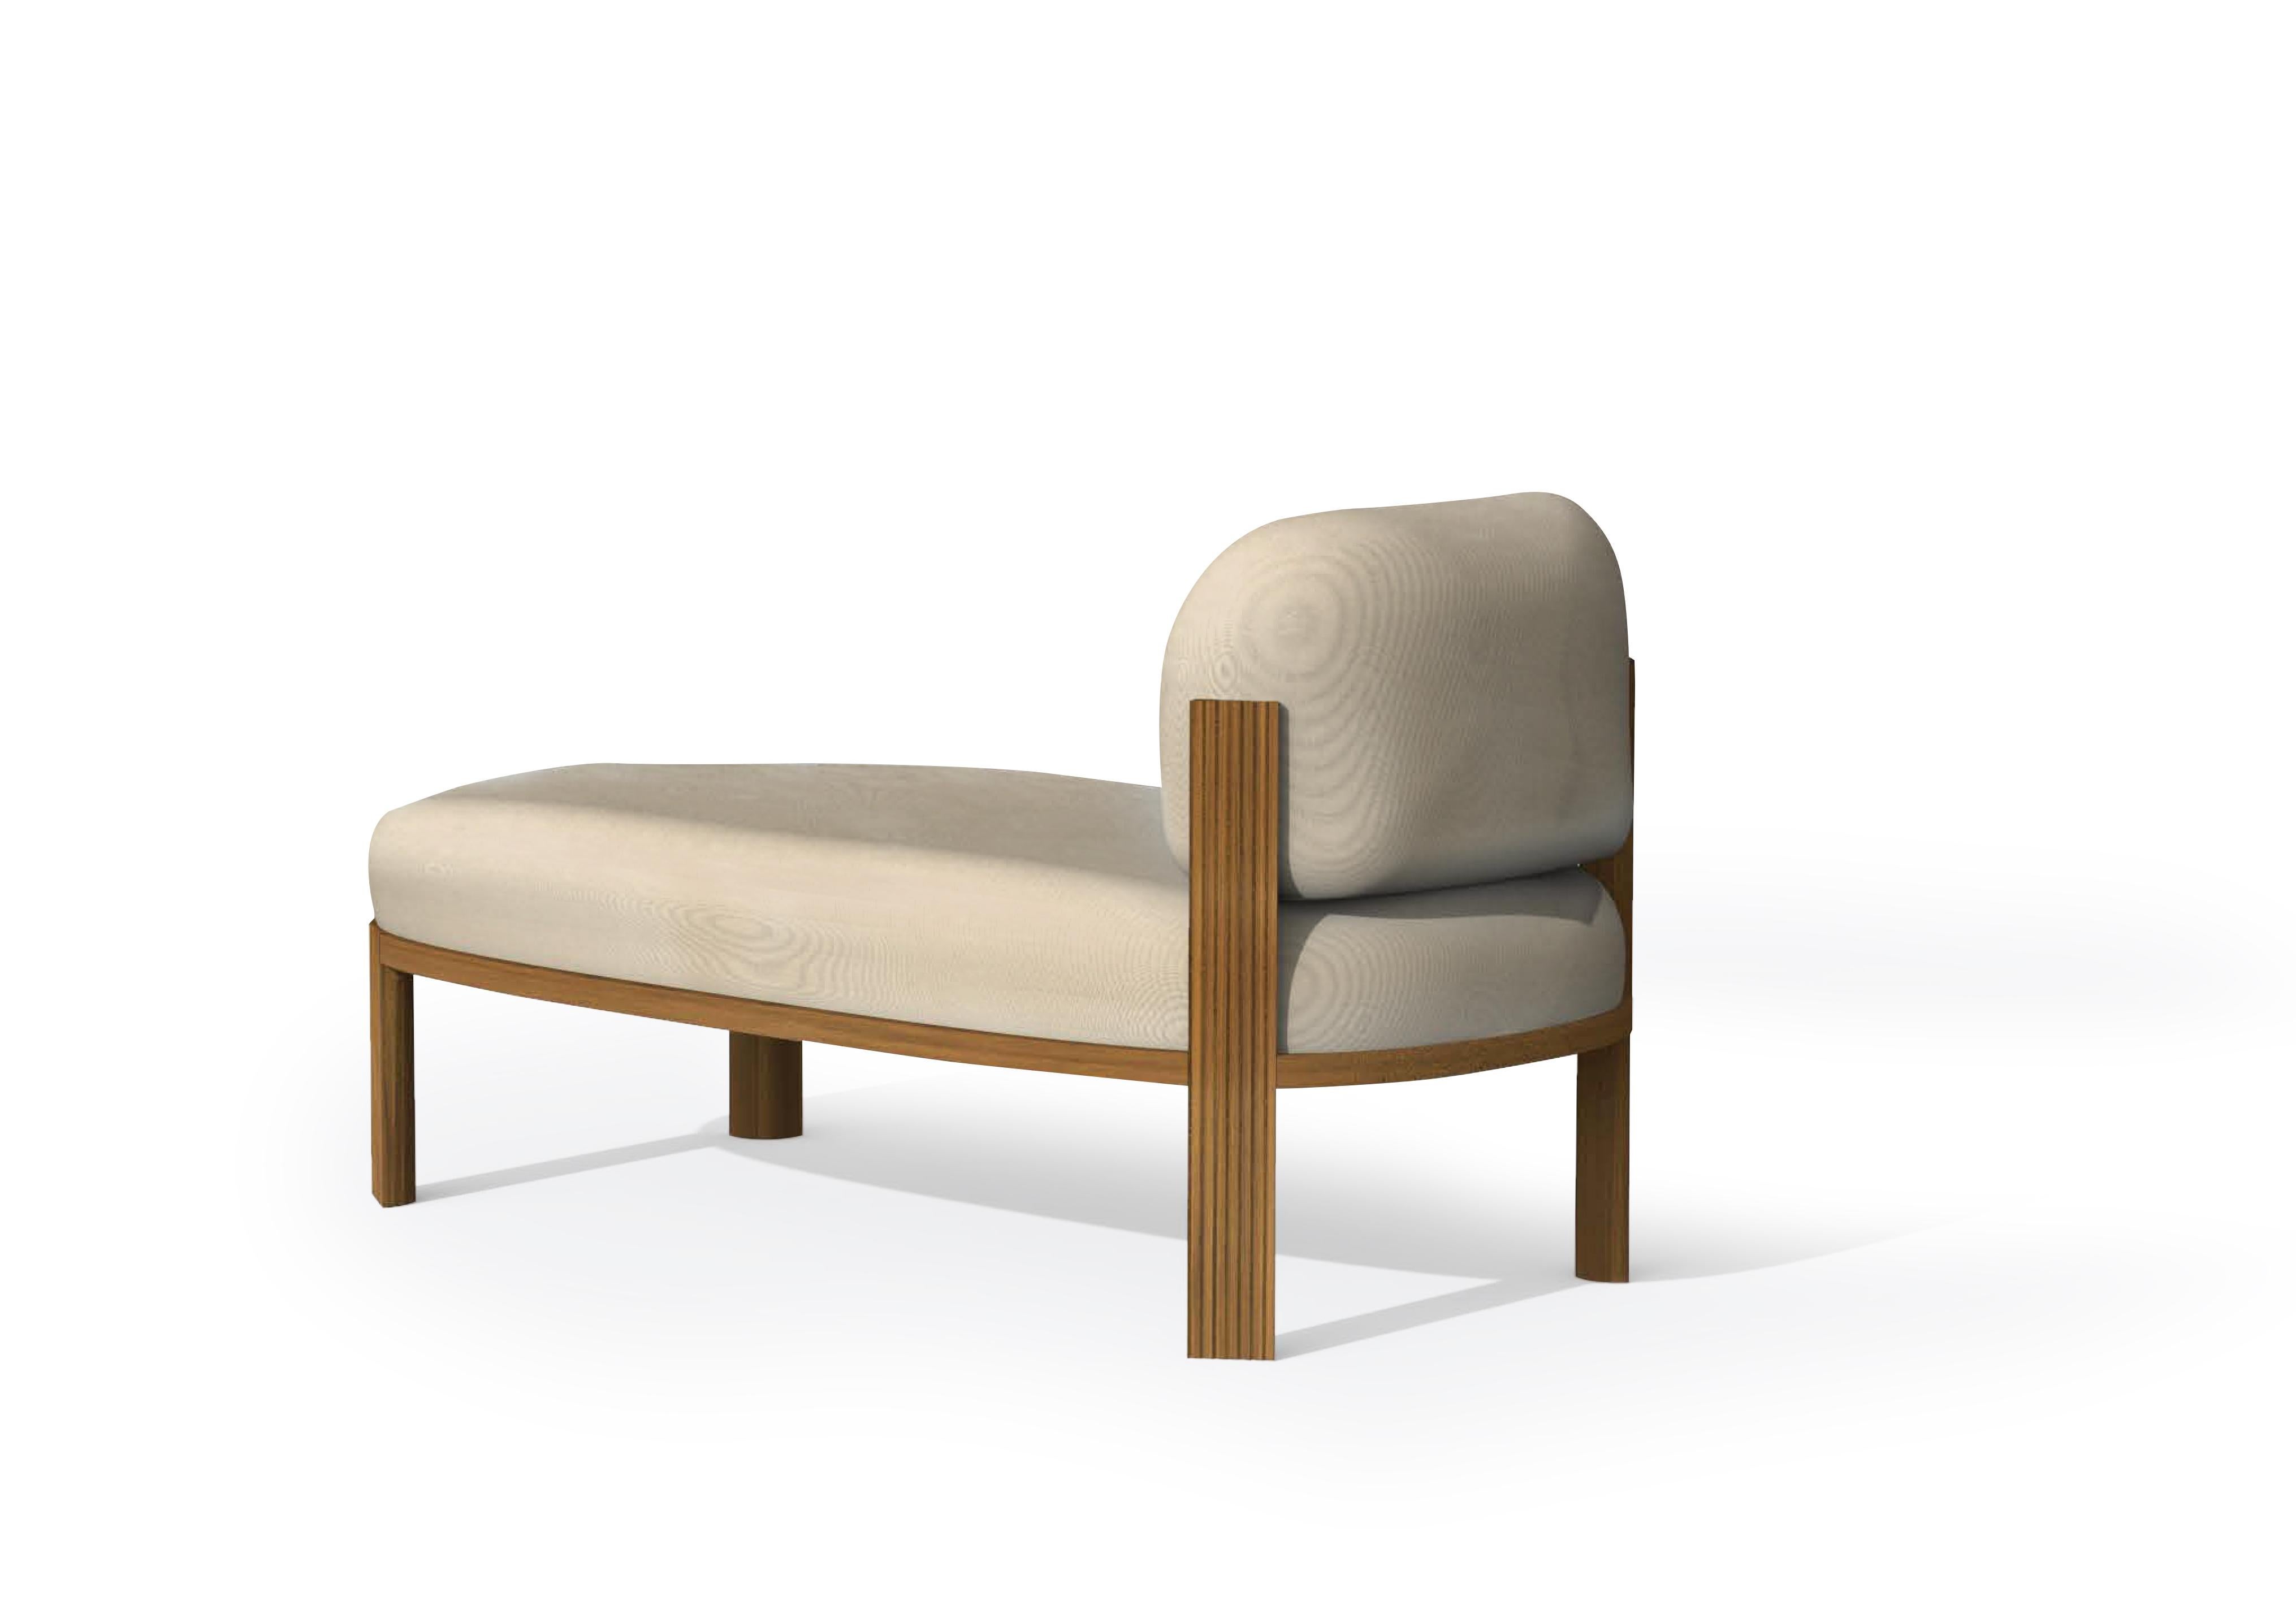 Unique daybed by Collector
Dimensions: W 190 x D 90 x H 50 cm
Materials: Fabric, Oak Wood 
Other materials available.

The Collector brand aims to be part of the daily life by fusing furniture to our home routine and lifestyle, that’s why we’ve